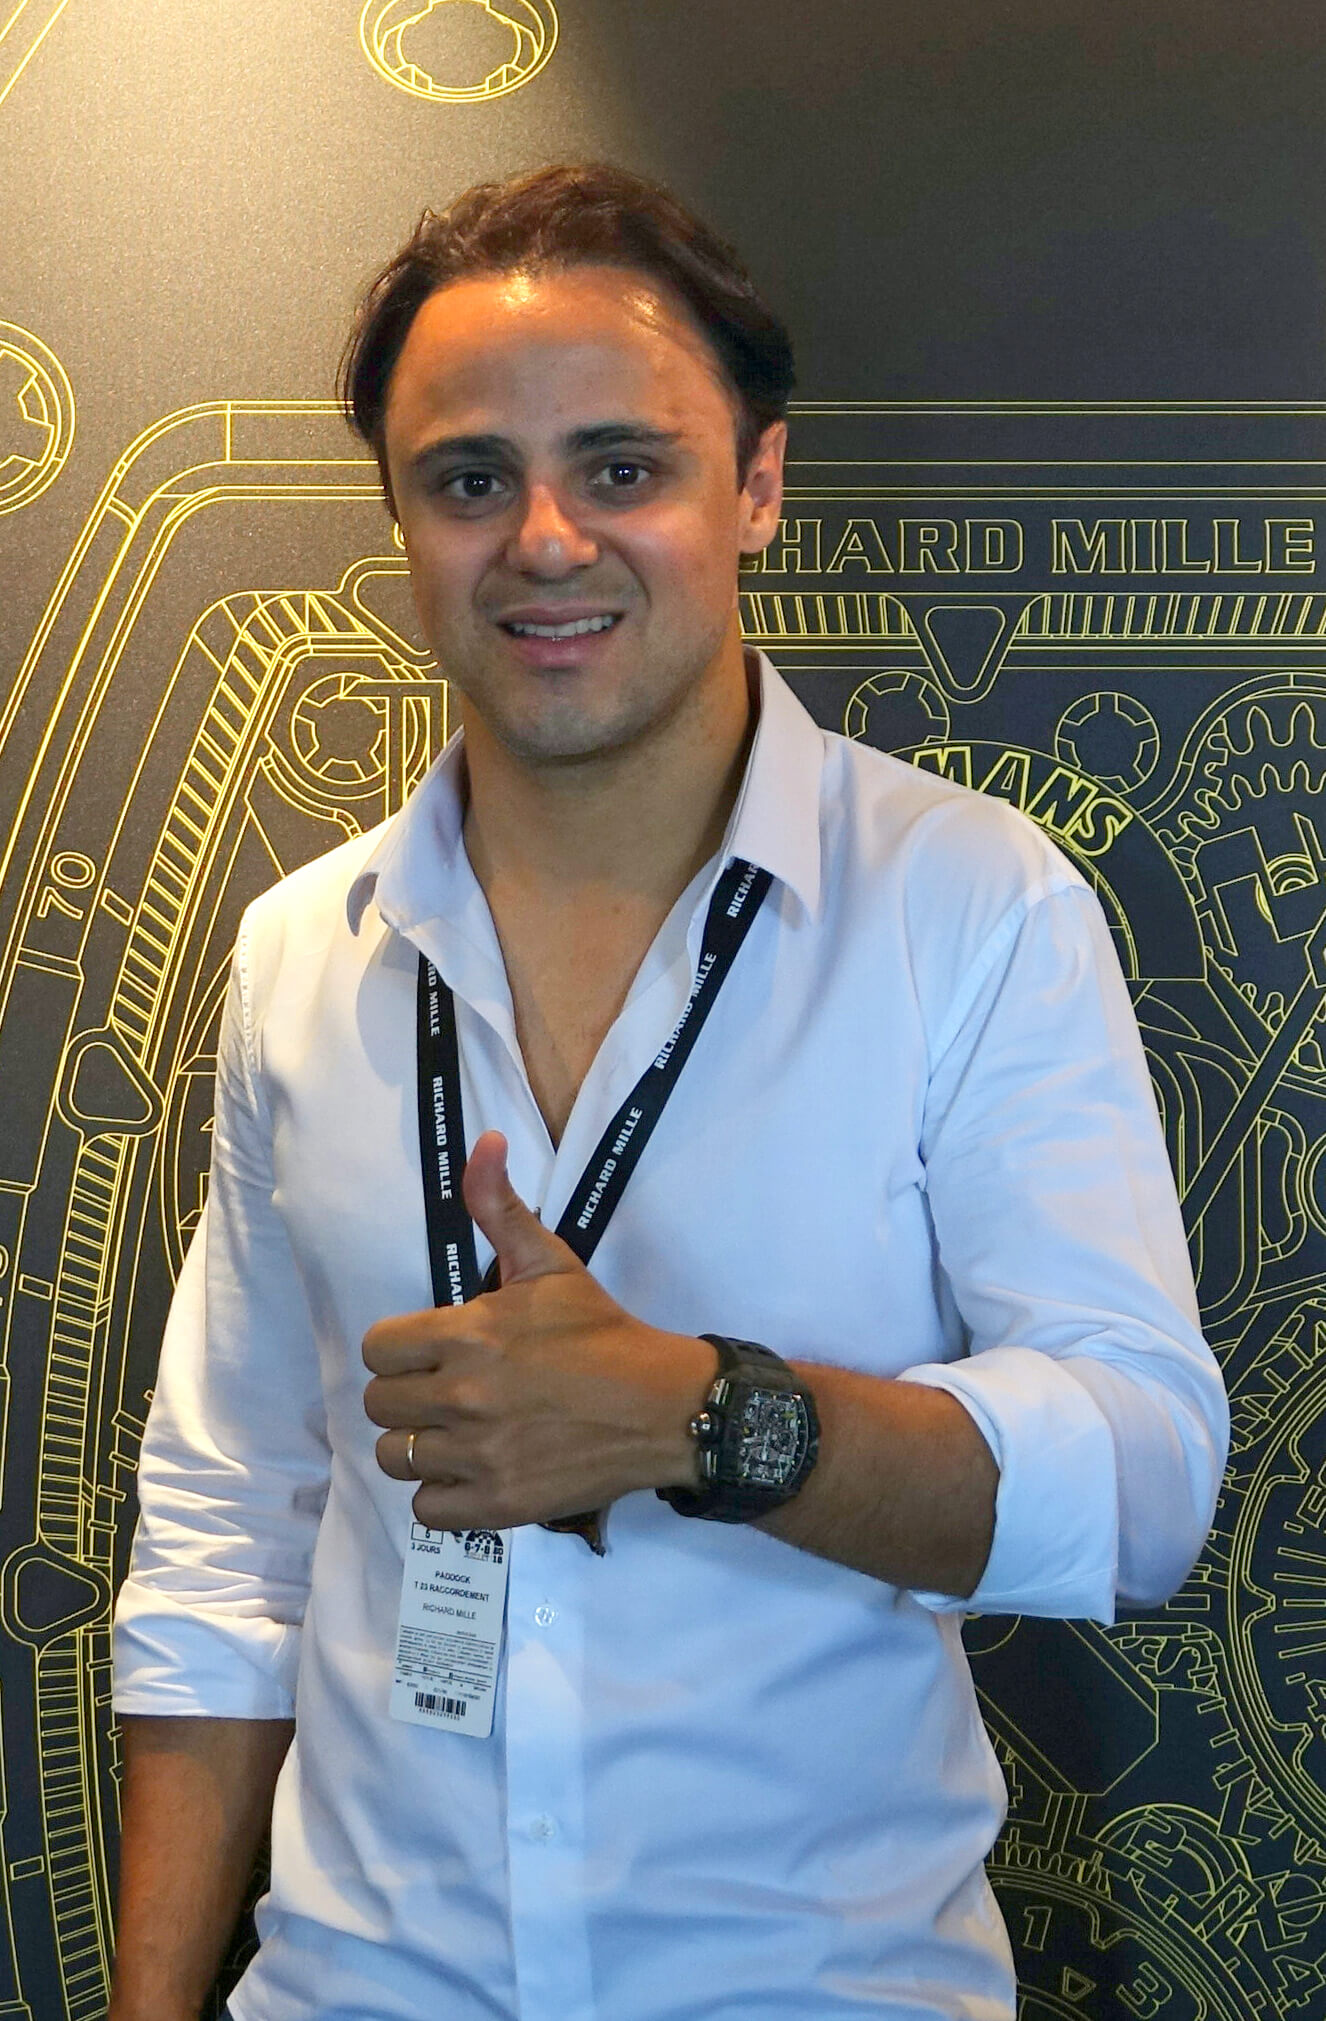 Man Wearing Black Richard Mille Timepiece and a White Button-down Shirt Smiles in Front of a Richard Mille Schematic.